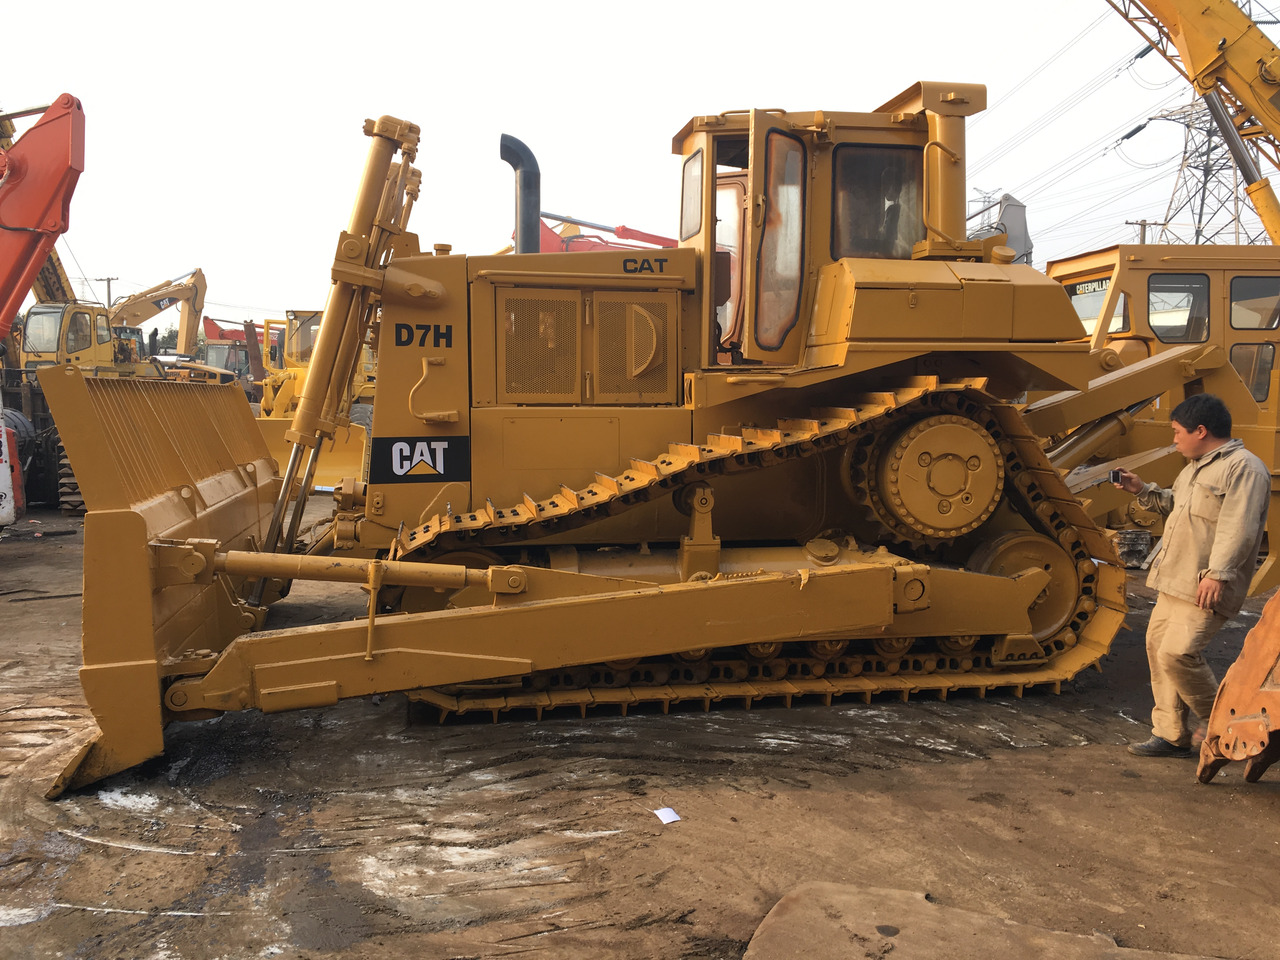 Bulldozer nuevo Famous brand CATERPILLAR D7H in China with good condition: foto 4